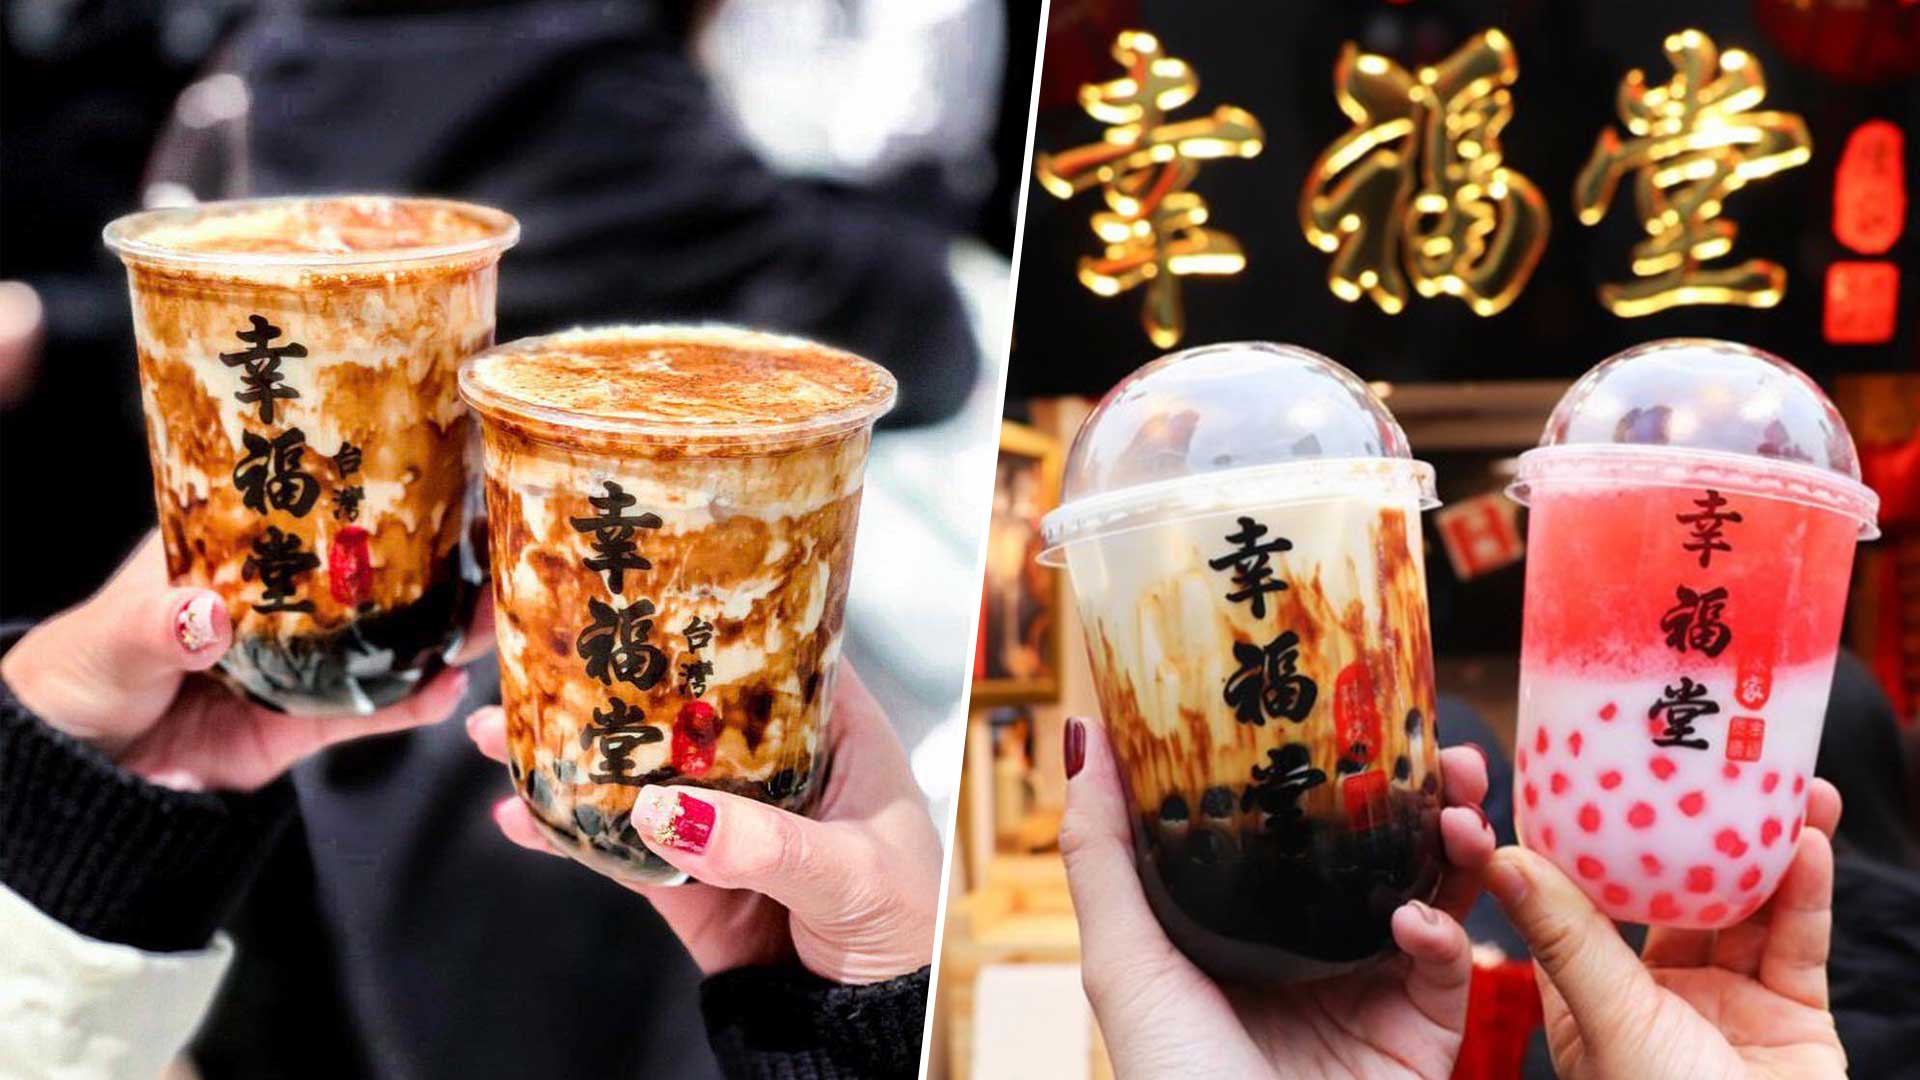 Famous Taiwanese Bubble Tea Chain Xing Fu Tang Opening At Century Square In SG